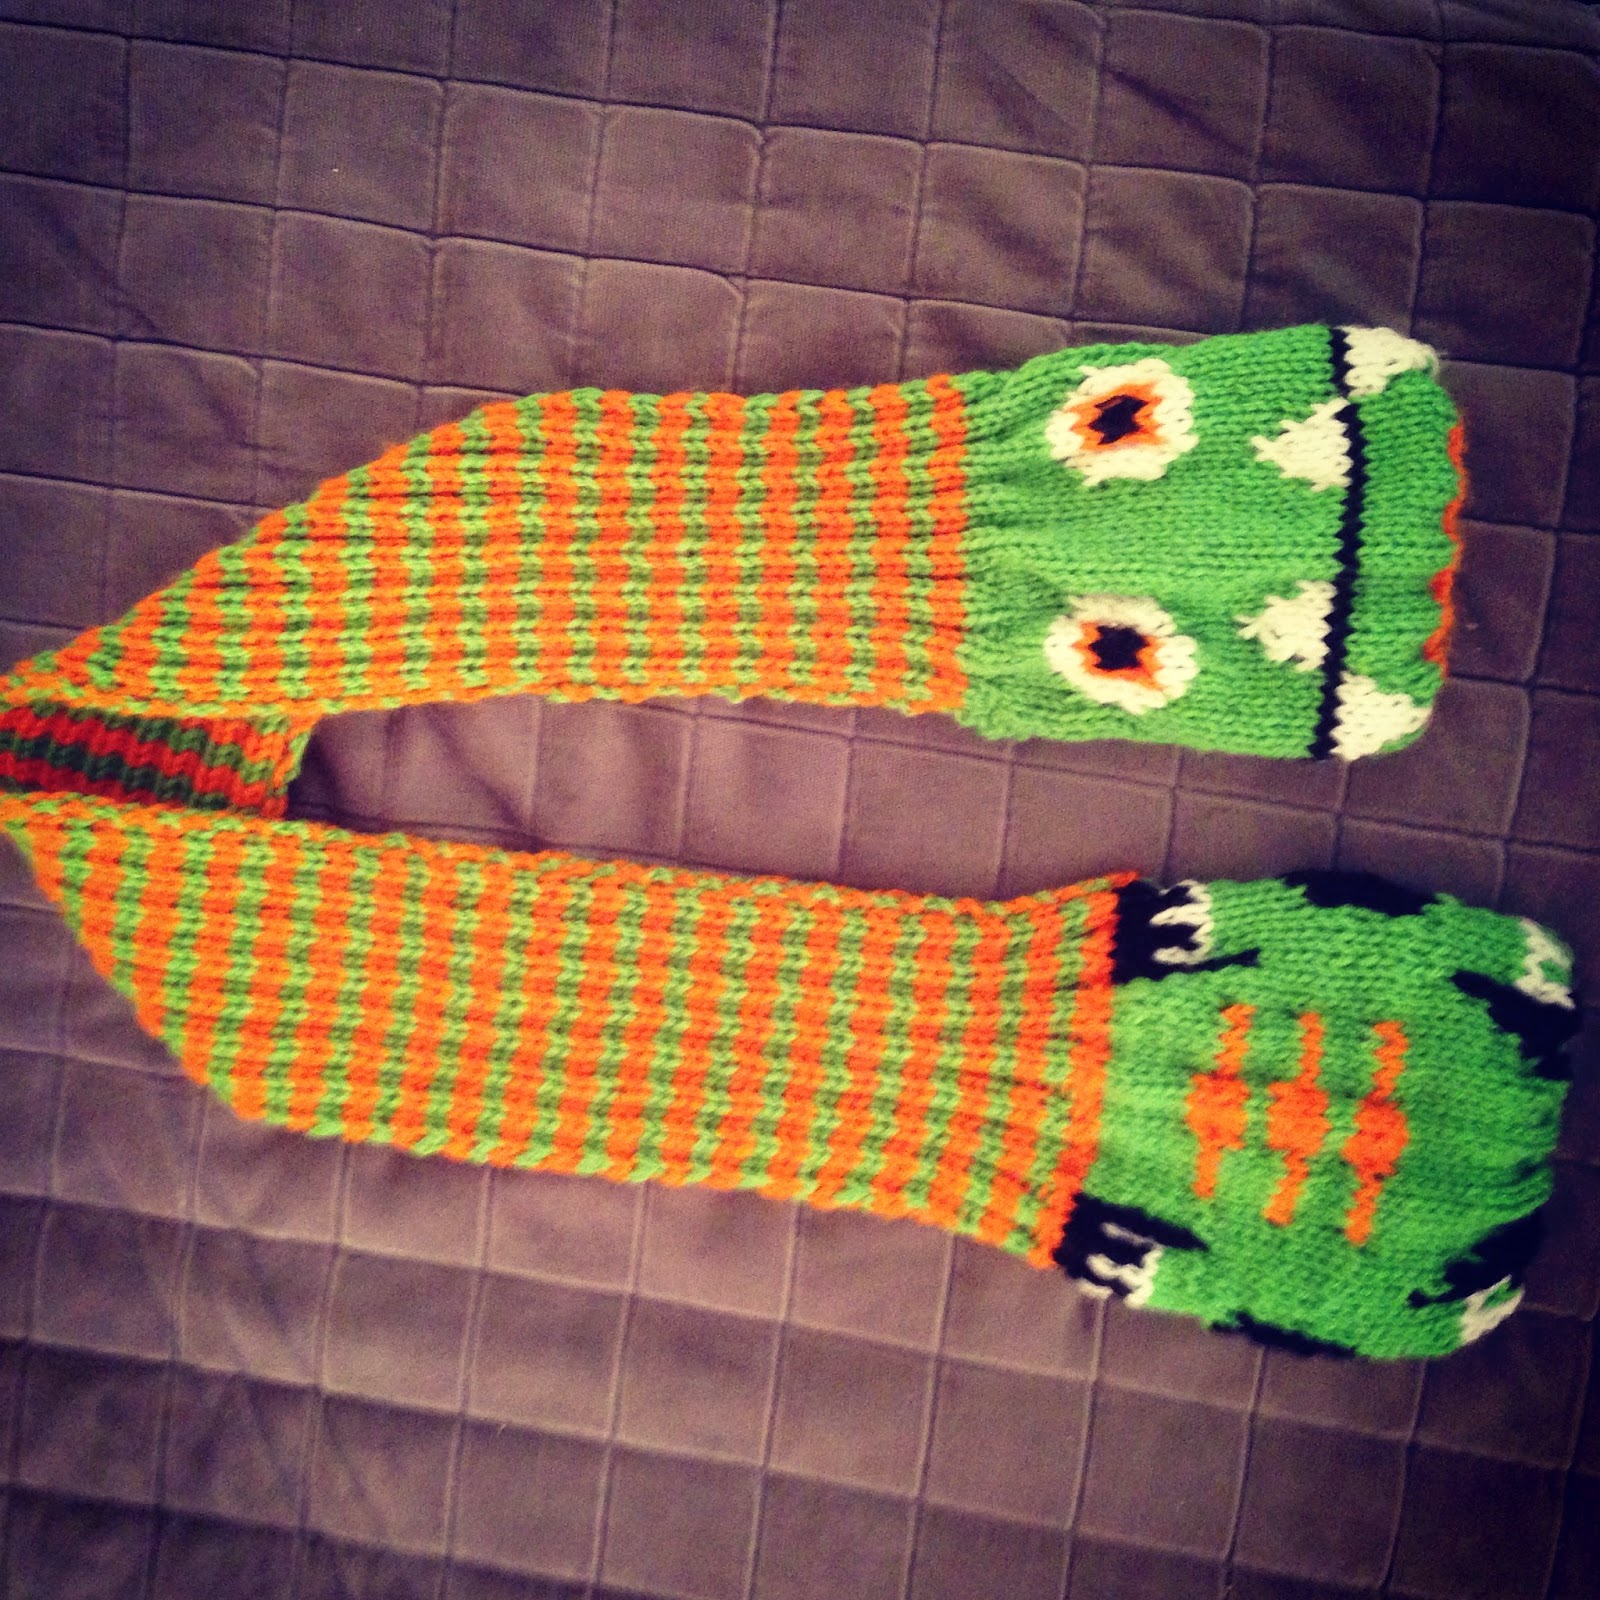 https://www.etsy.com/listing/217039240/childrens-dragon-scarf-green-and-orange?ref=shop_home_active_1